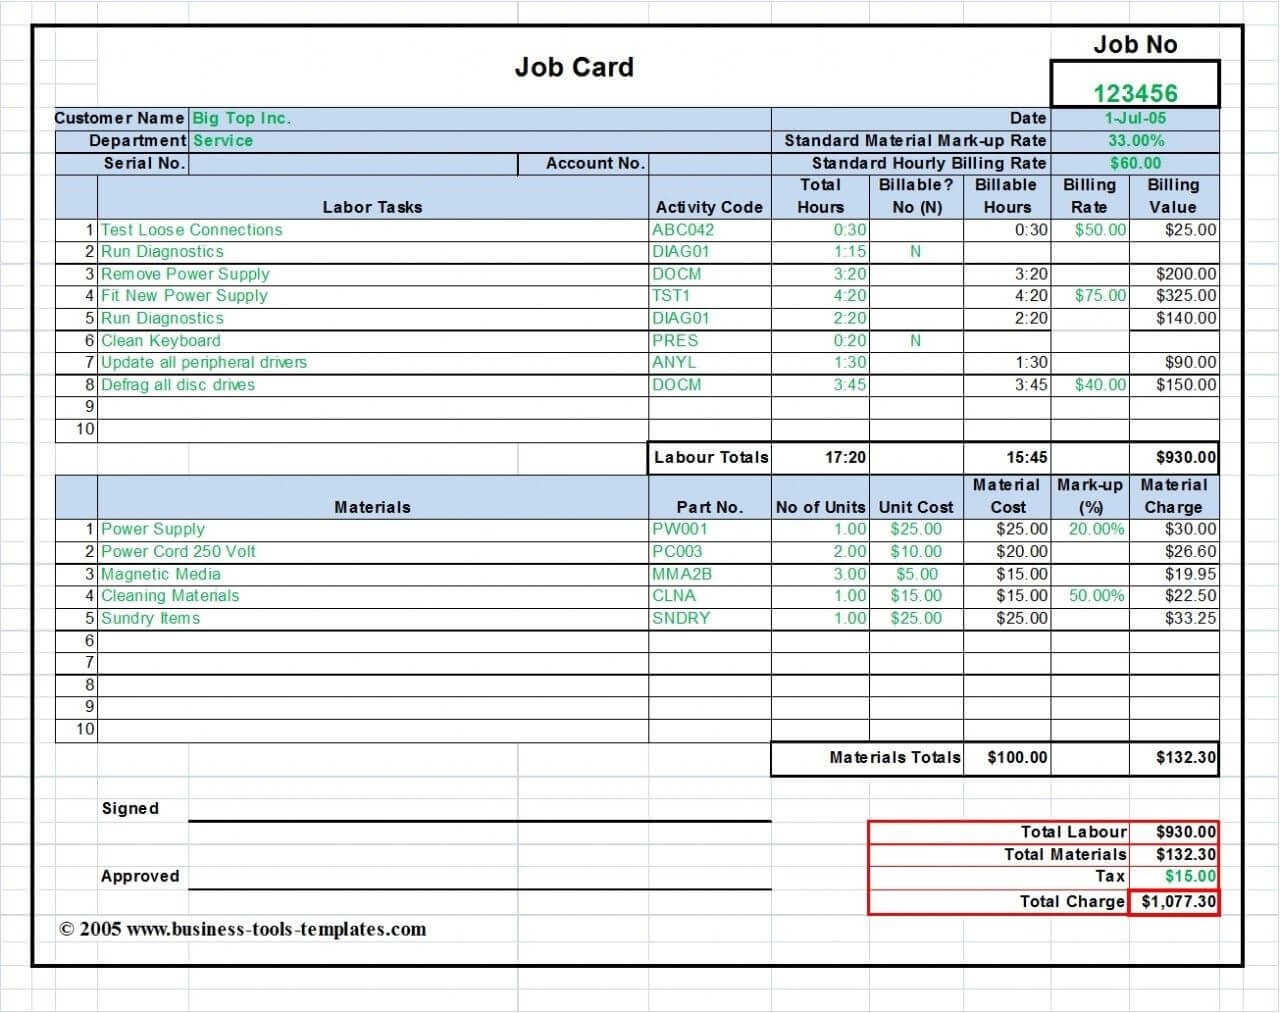 Workshop Job Card Template Excel, Labor & Material Cost Pertaining To Mechanics Job Card Template